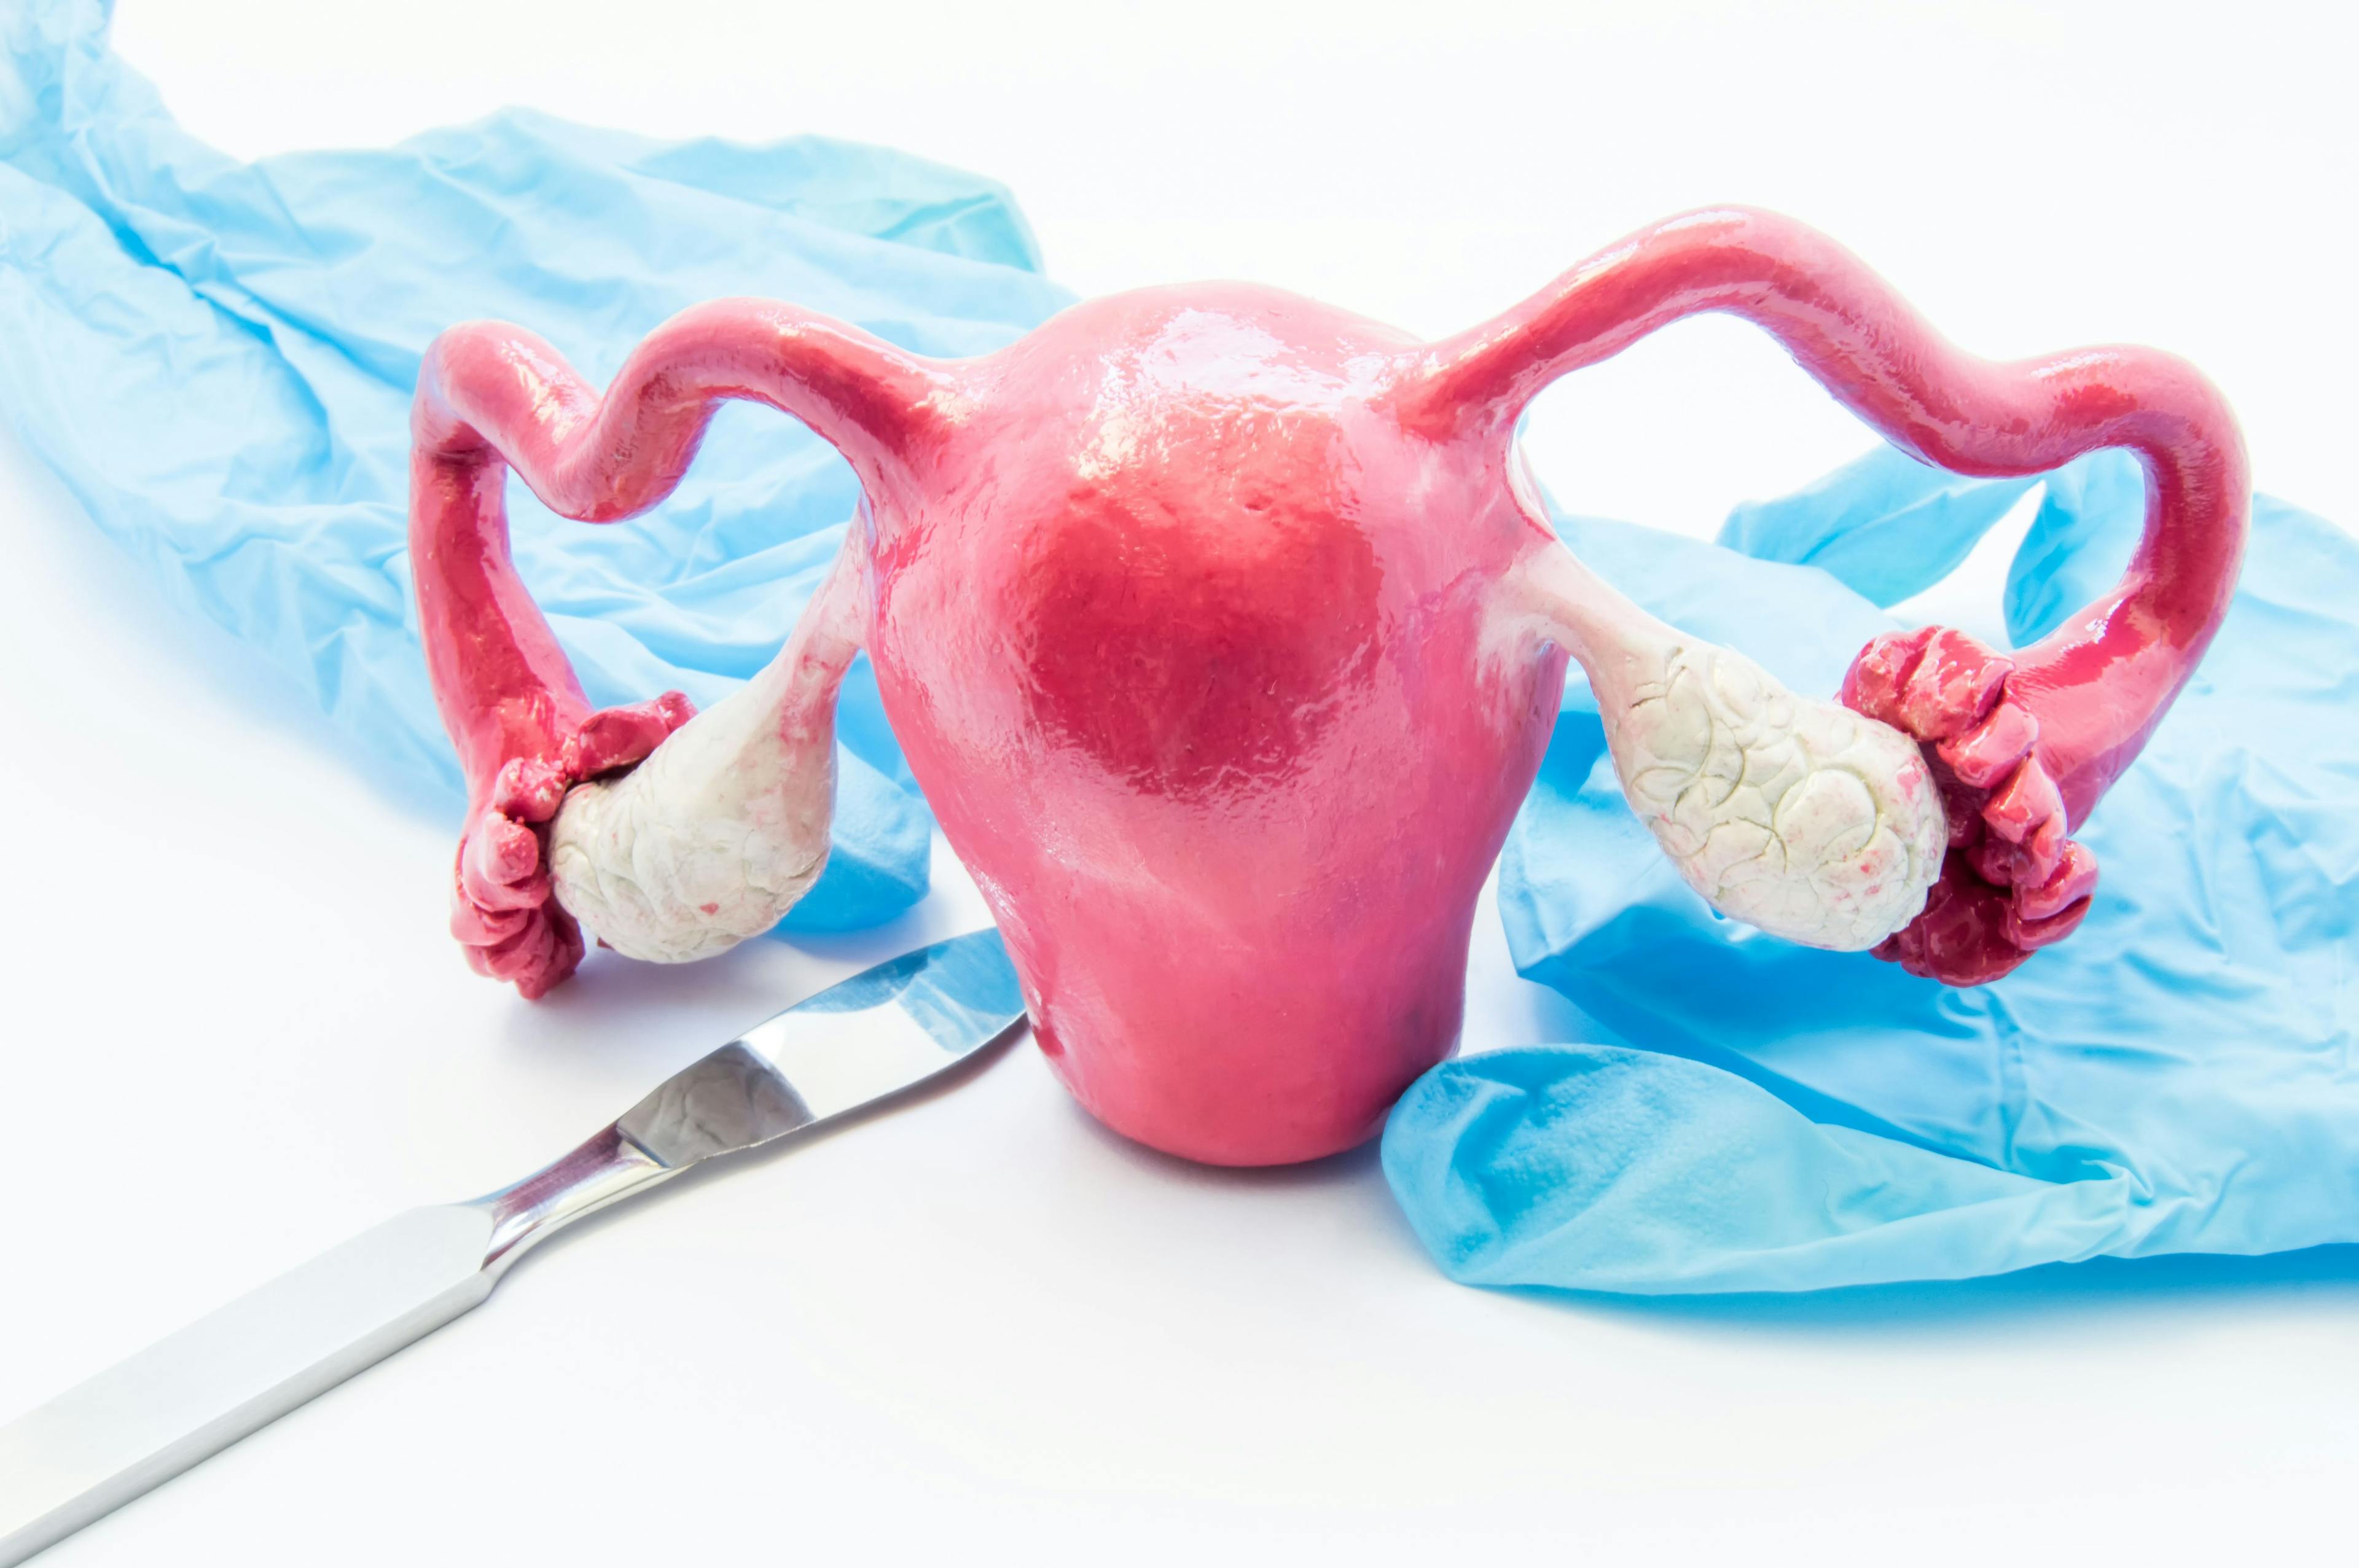 Concept of gynecology surgery. 3D model of female uterus is near scalpel and medical gloves. Surgery in gynecology and operation on uterus, ovaries or fallopian tubes such hysterectomy or myomectomy | Image credit: © shidlovski - stock.adobe.com